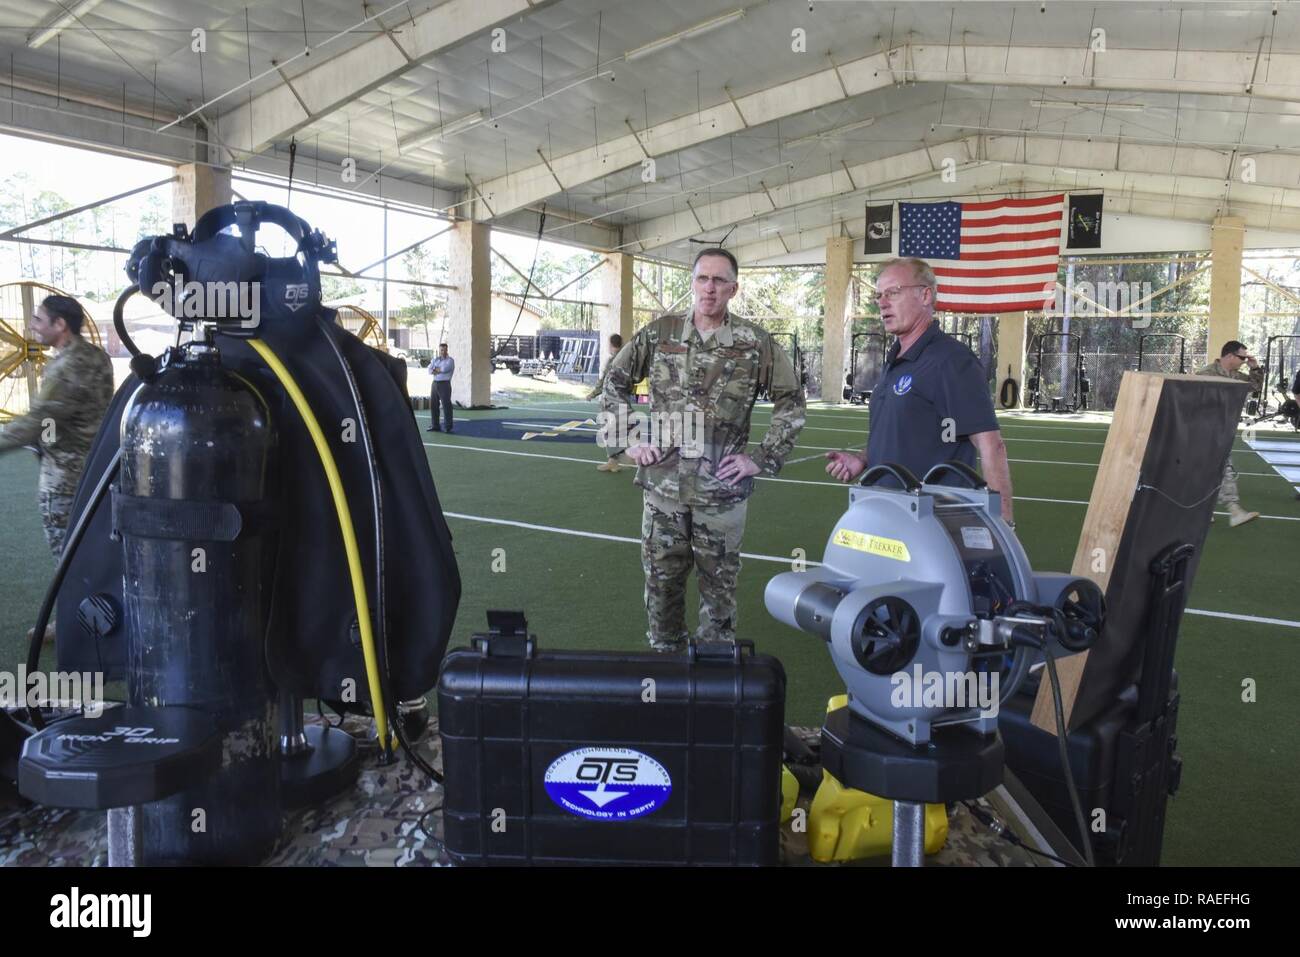 Maj. Gen. Scott Vander Hamm, assistant deputy chief of staff of operations, head quarters Air Force, visits Air Force Special Operations Command, Hurlburt Field, Fla., Jan. 18, 2017. Vander Hamm met with AFSOC key personnel during a visit to orient himself with AFSOC. Stock Photo